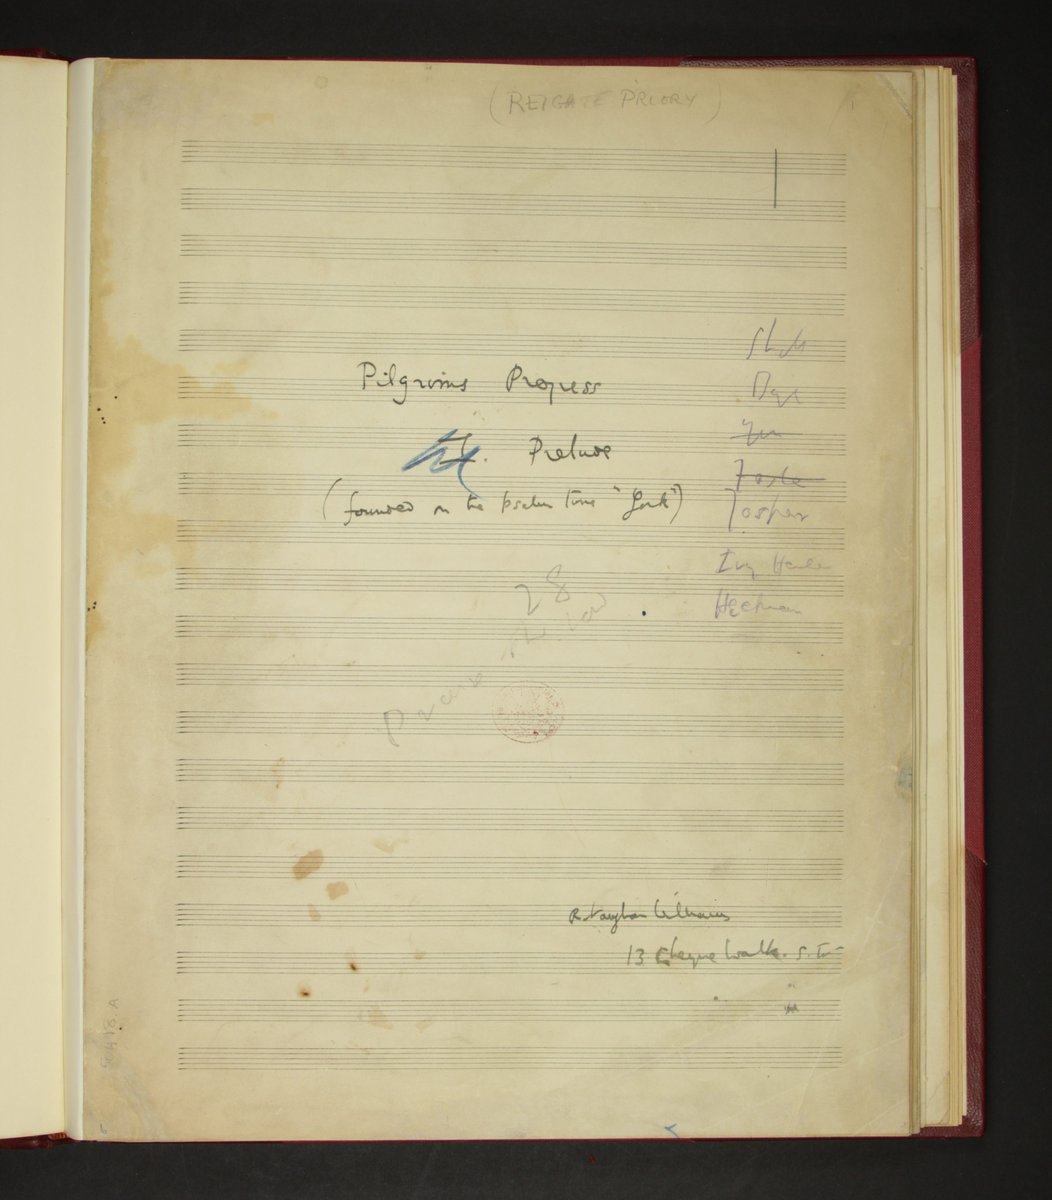 Finally, here is Ralph Vaughan Williams' music for a production of the Pilgrim's Progress. The dramatisation was written by Mrs Hadley and Miss Ouless, and it was first performed in 1906.This manuscript is in the composer's own hand. https://www.bl.uk/collection-items/vaughan-williams-music-for-the-pilgrims-progress